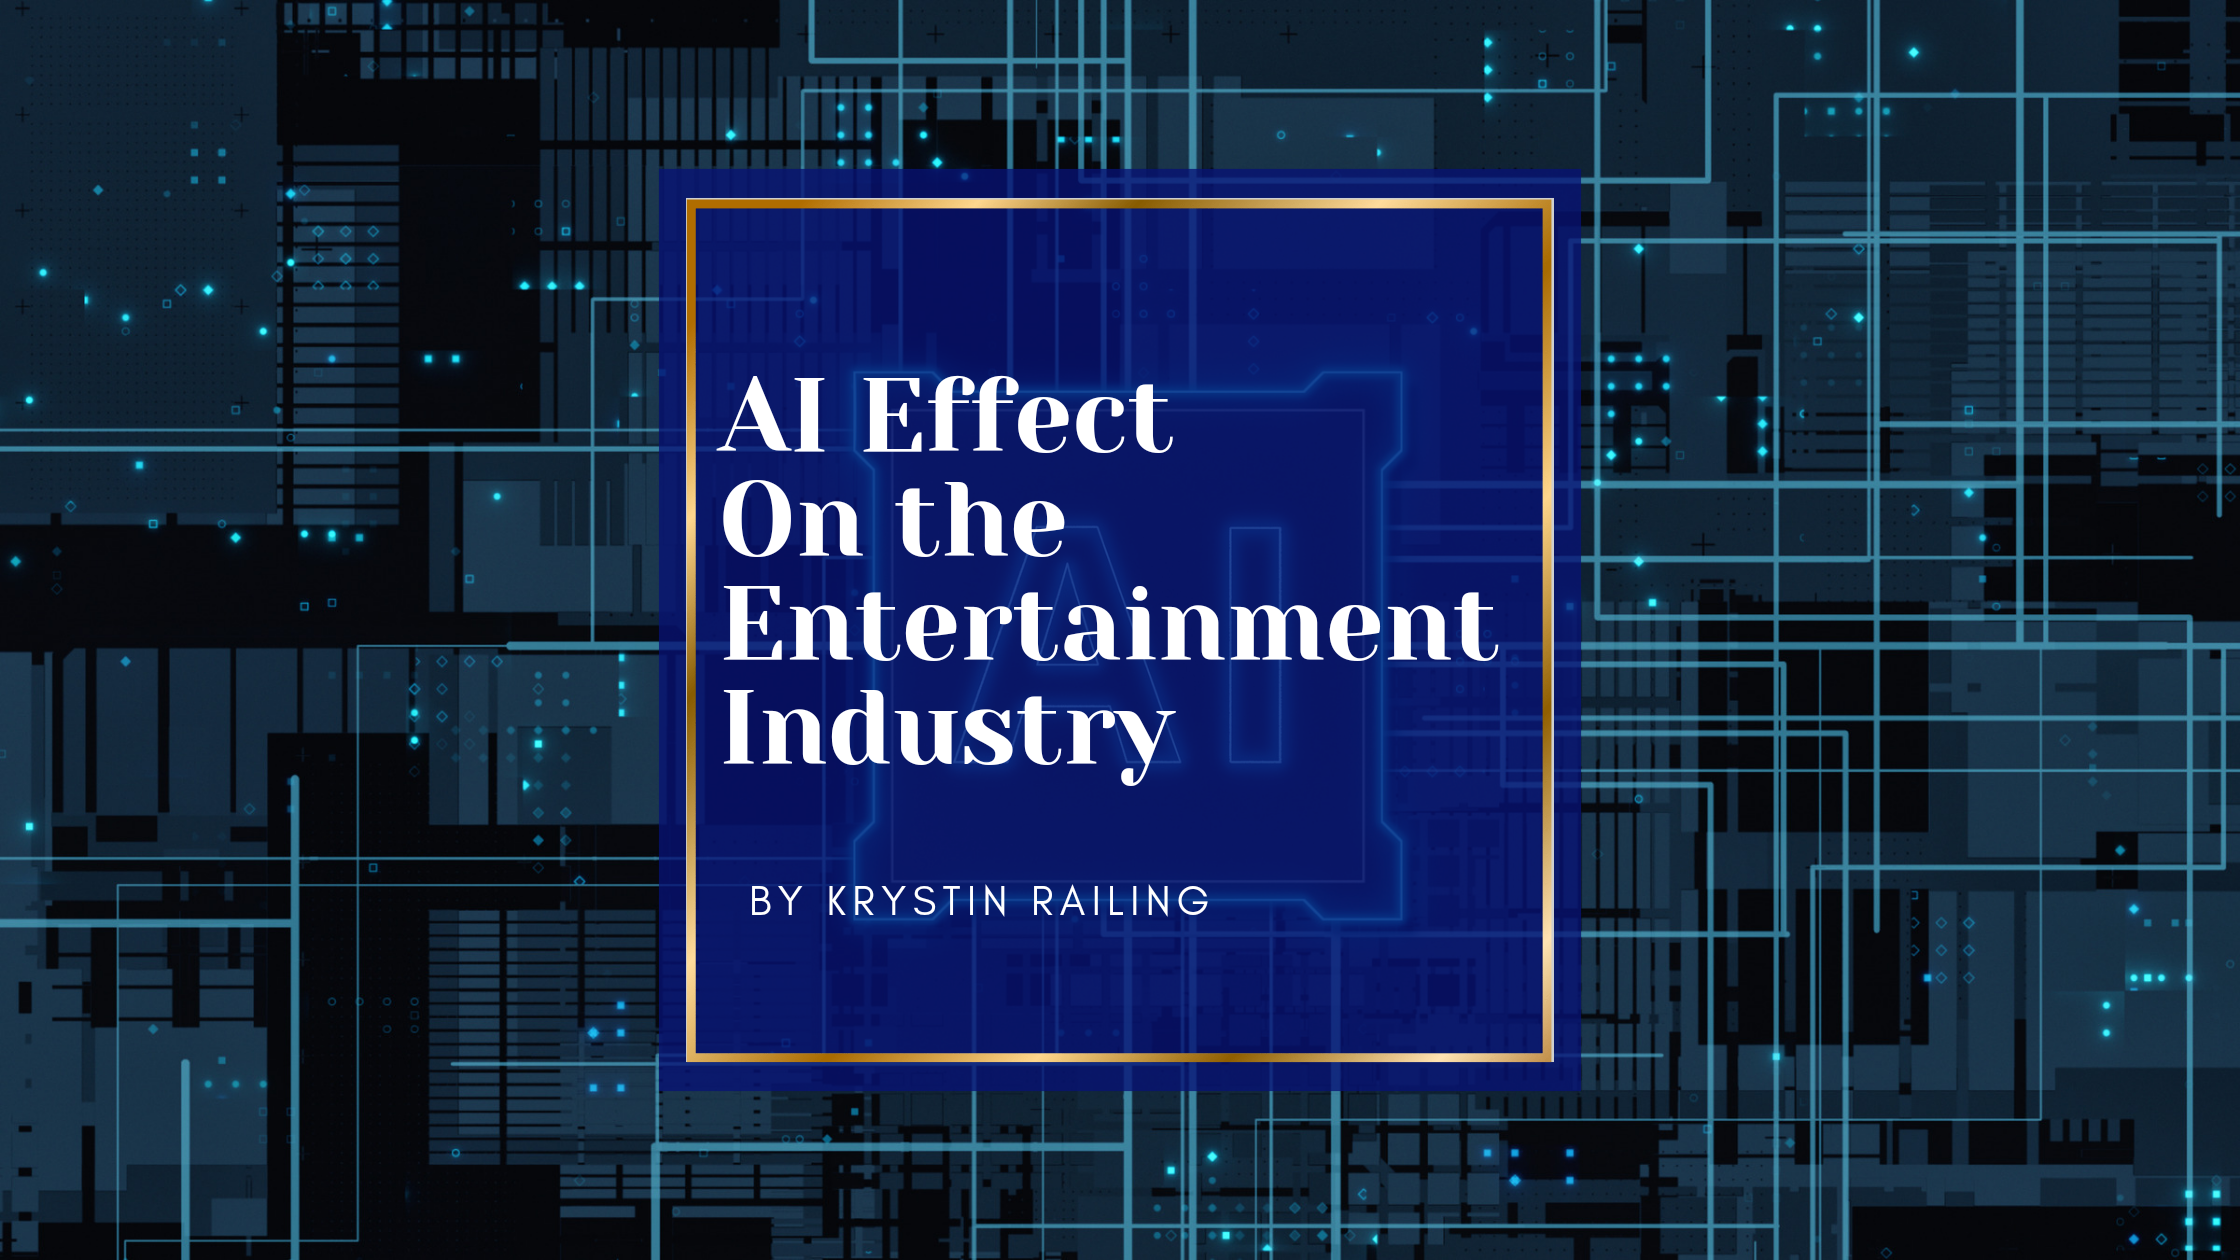 AI Effect on the Entertainment Industry